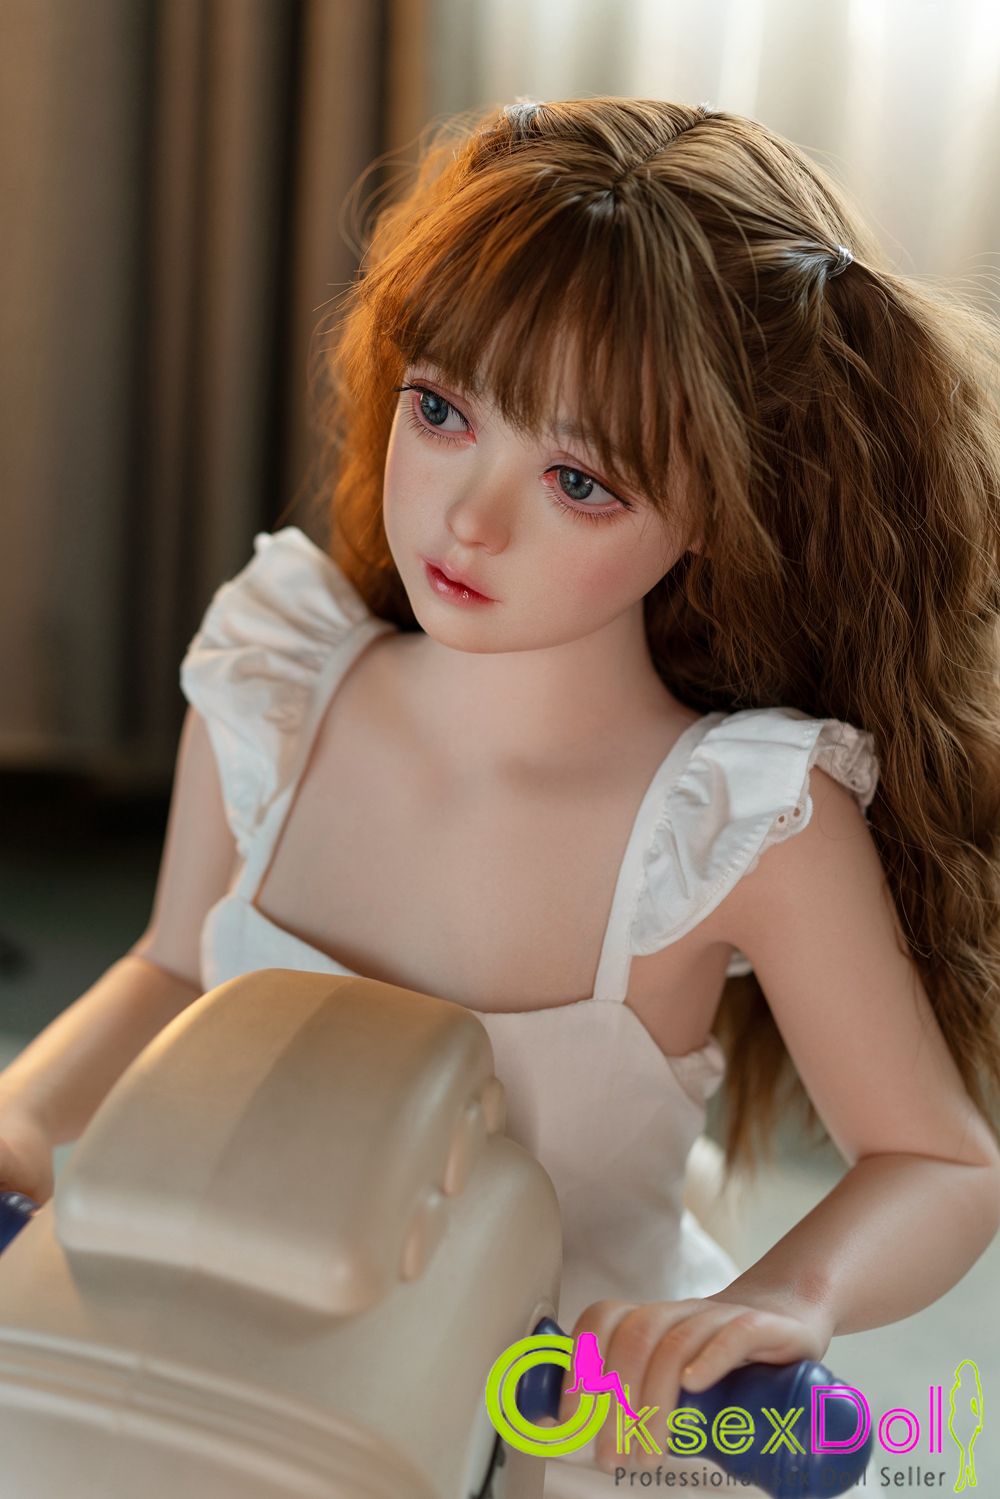 Flat Chested real doll Photos